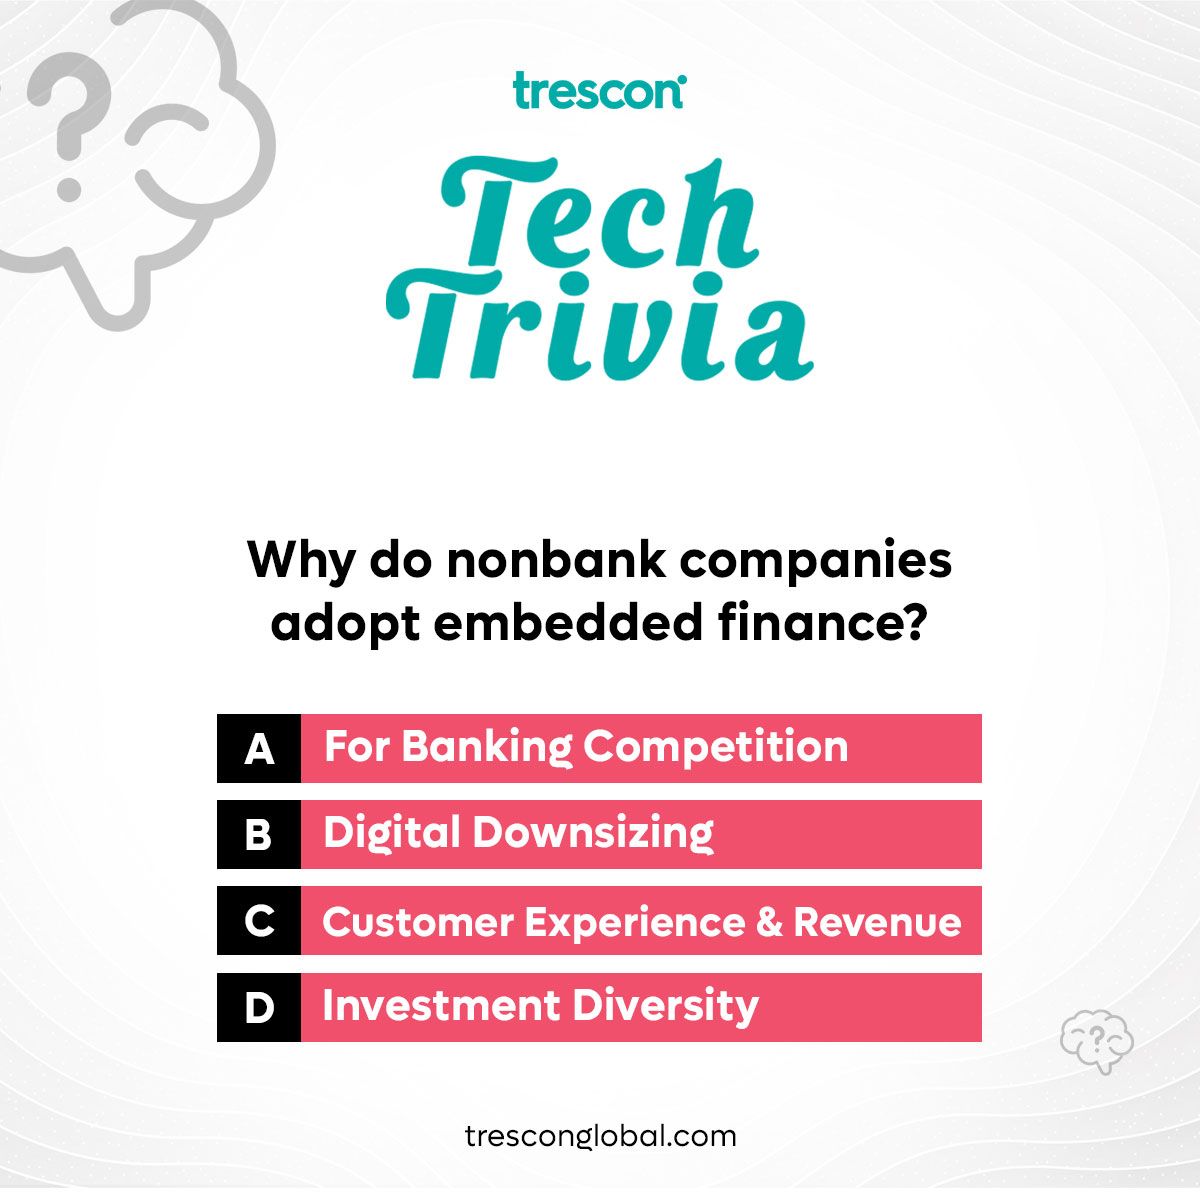 Explore the future of finance with our latest #TechTrivia on LinkedIn! Why are non-bank companies embracing embedded finance? 

Answer first and win the Tech Virtuoso Badge! 

Join the challenge: hubs.li/Q02sZVlk0

#TresconTechTrivia #Trescon #TechTrivia #EmbeddedFinance